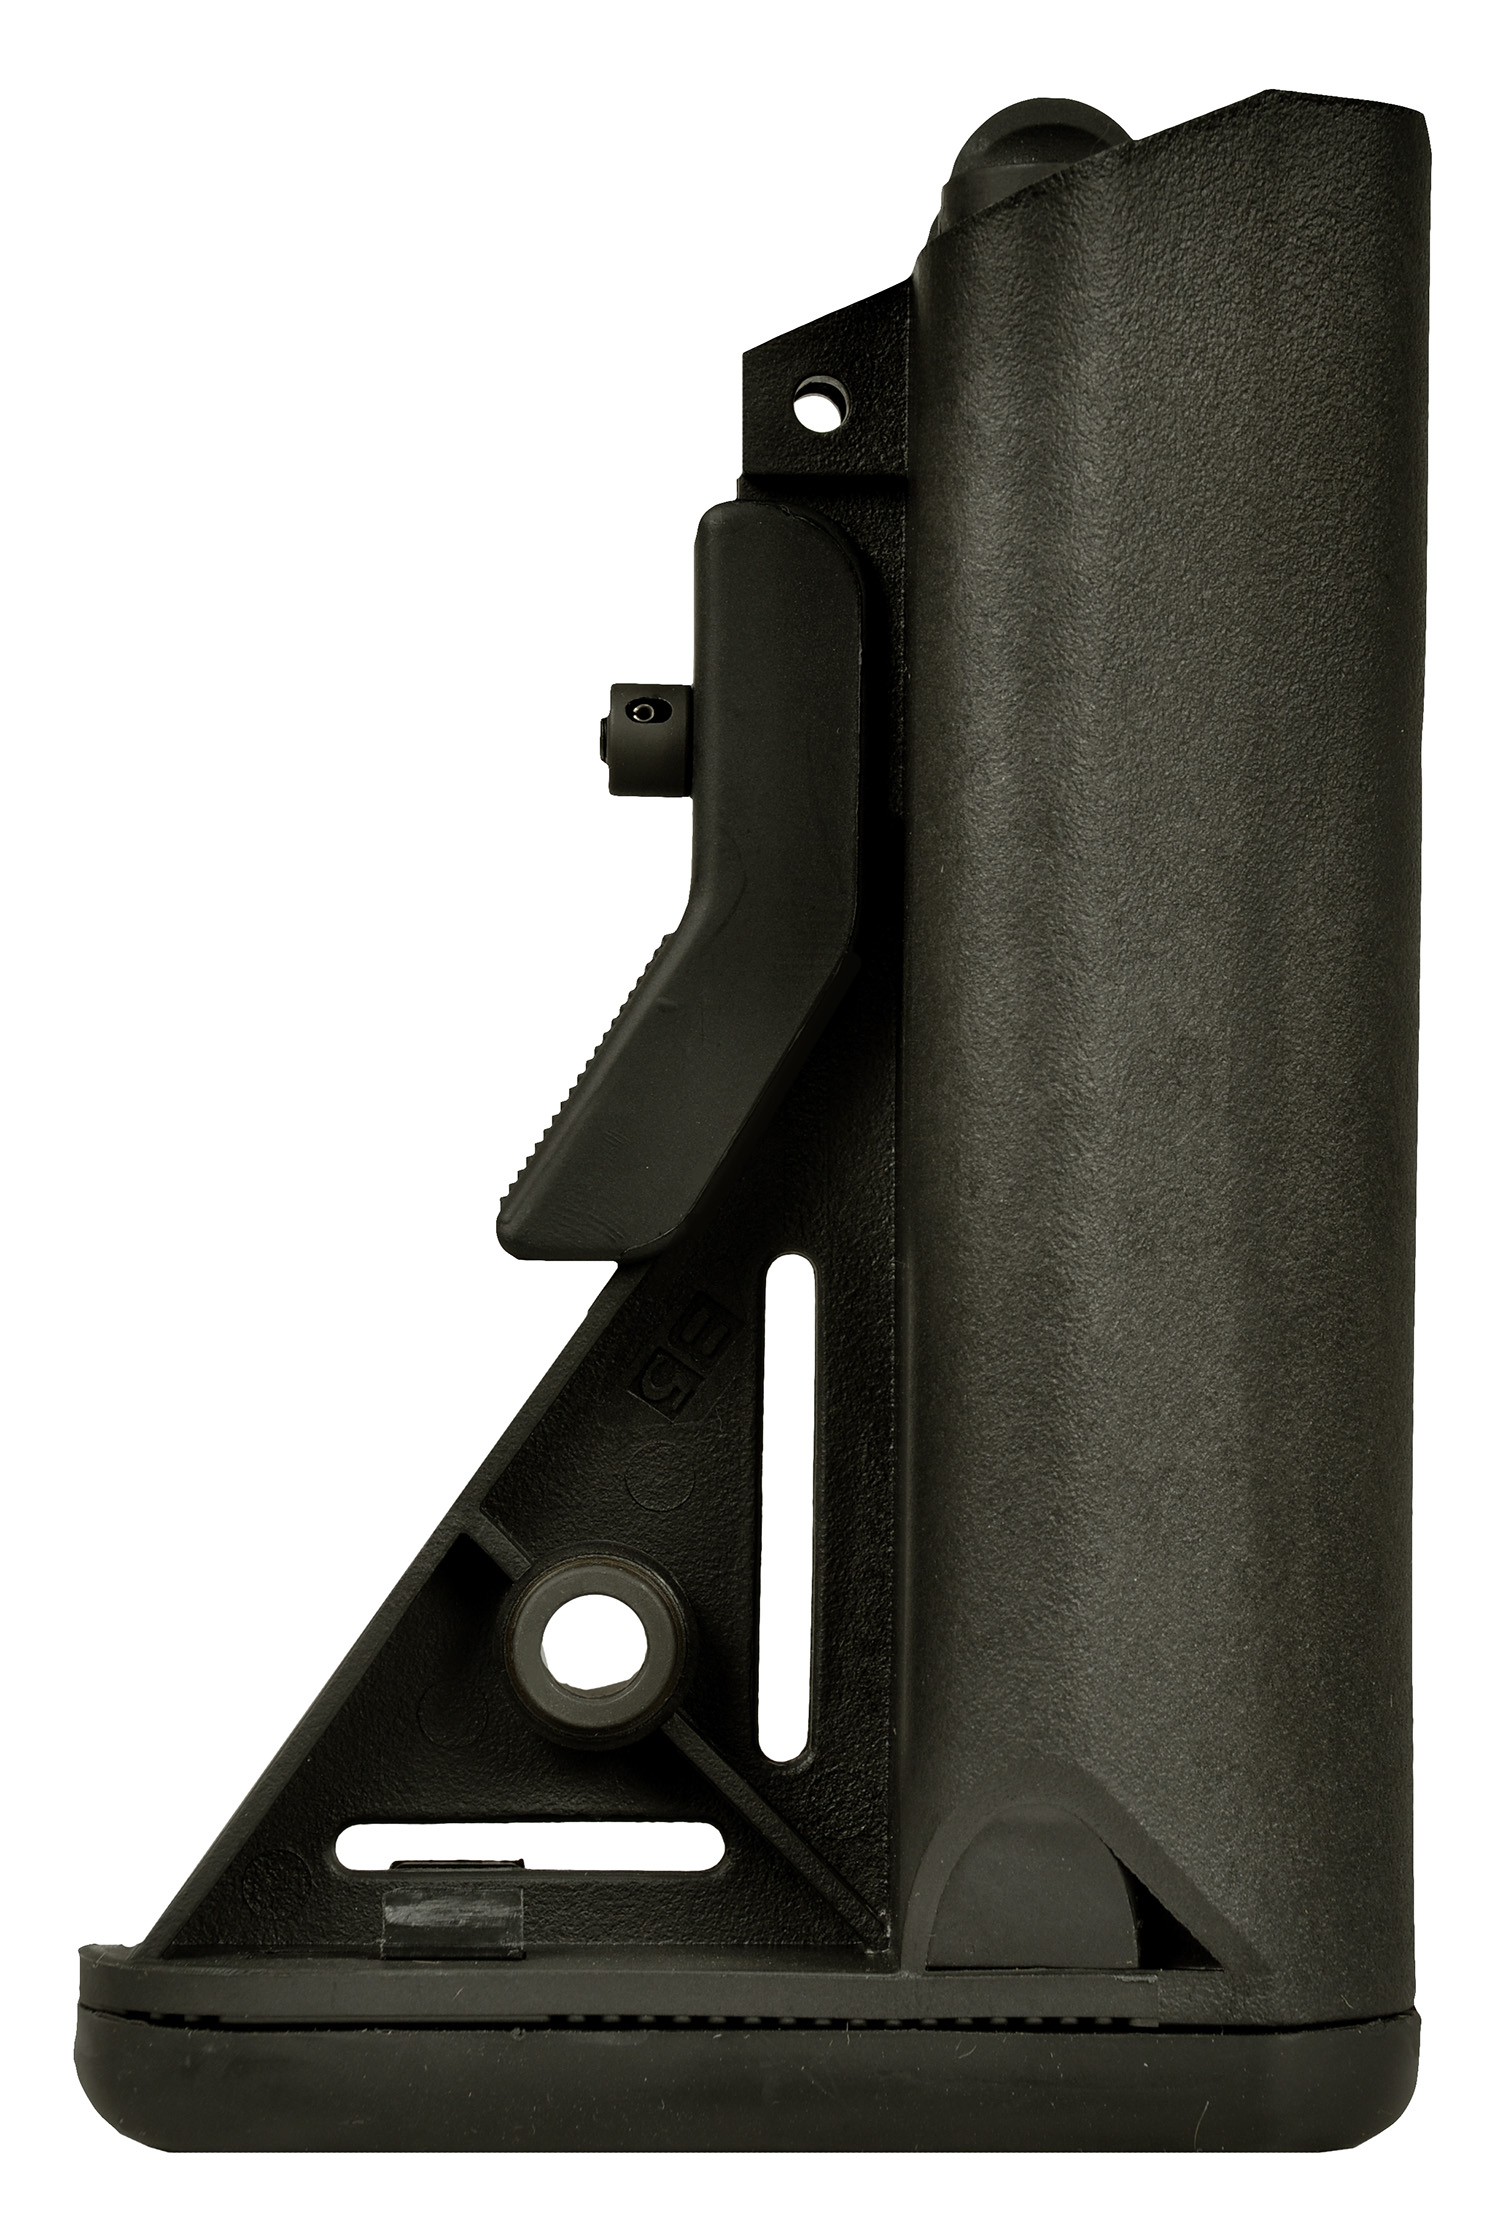 B5 Systems SOP1097 Enhanced SOPMOD Stock  OD Green Synthetic for AR-15, M4 with Mil-Spec Receiver Extension (Tube Not Included)